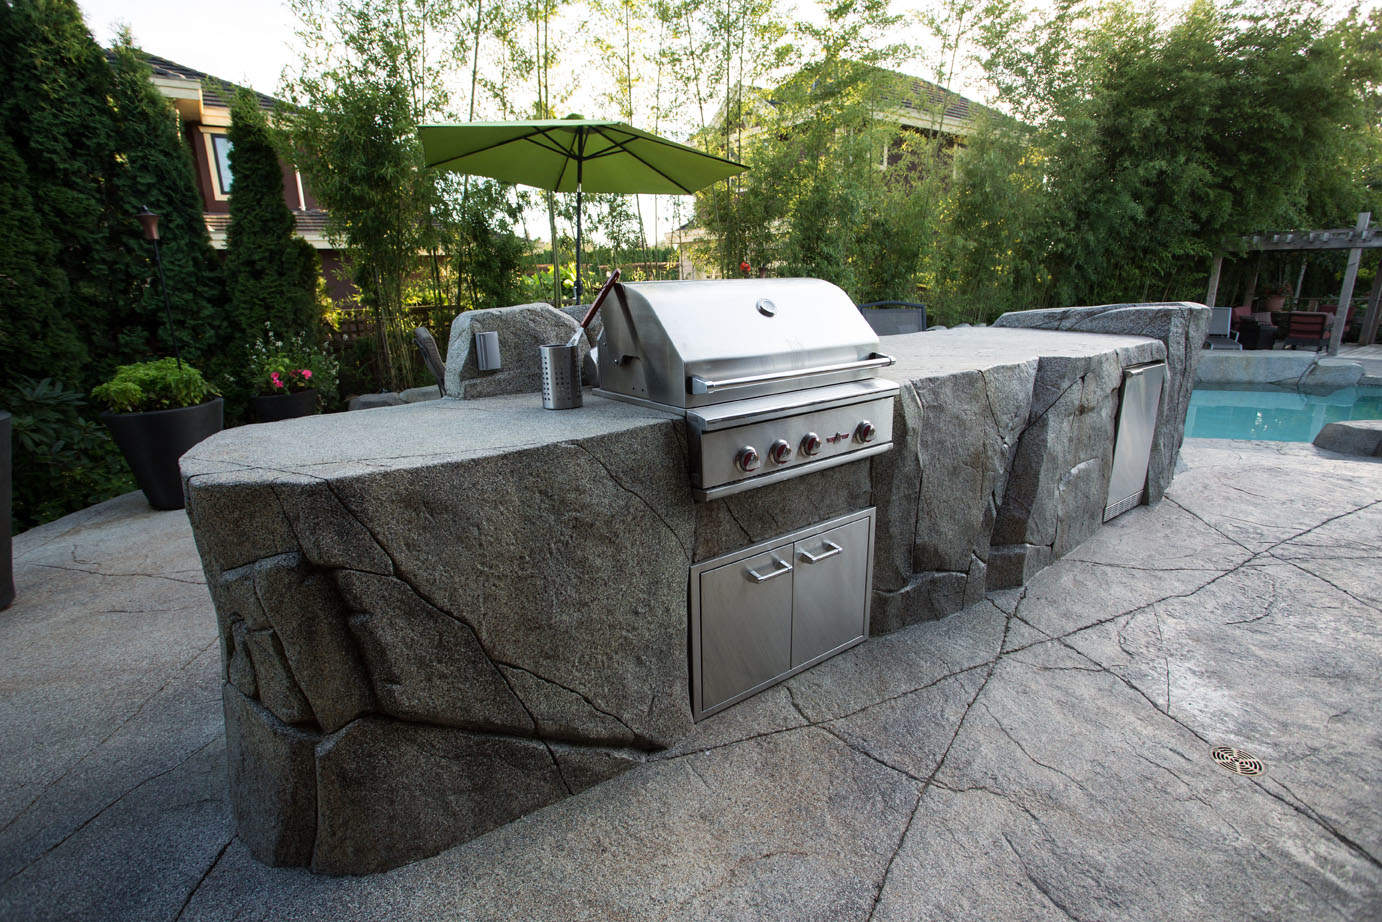 Outdoor kitchen with stainless steel built-in barbeque